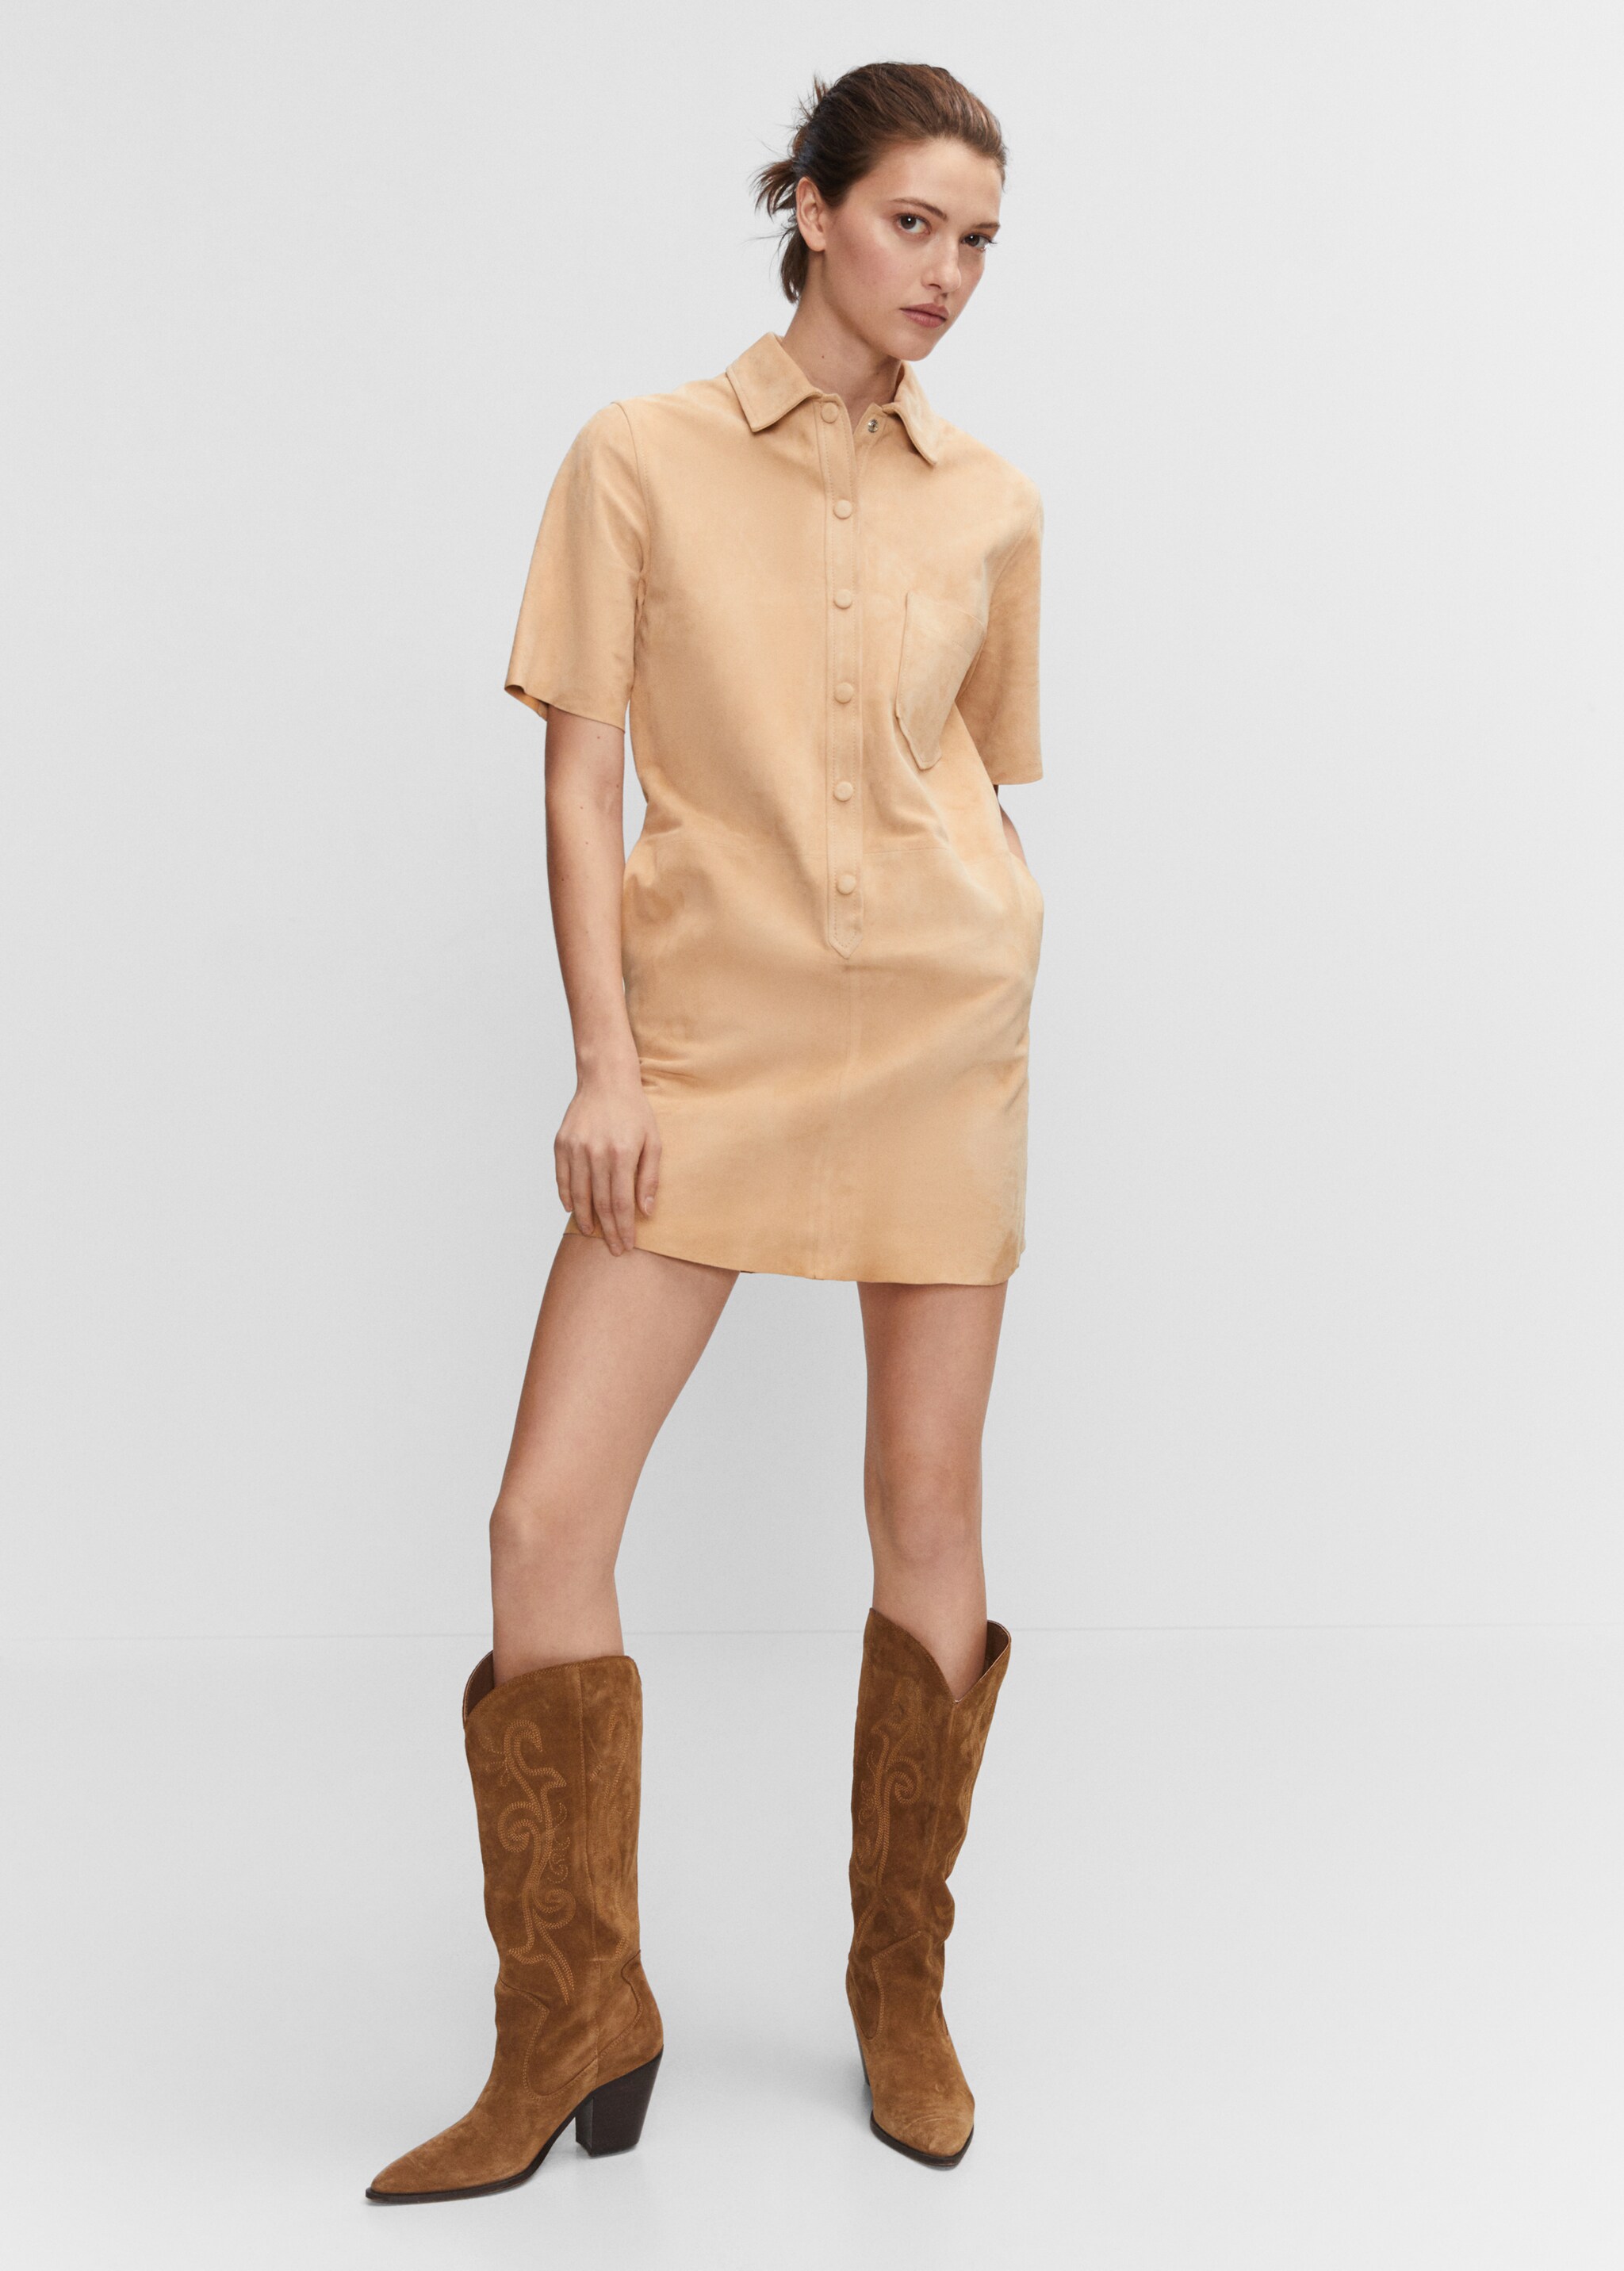 Buttoned leather dress - General plane